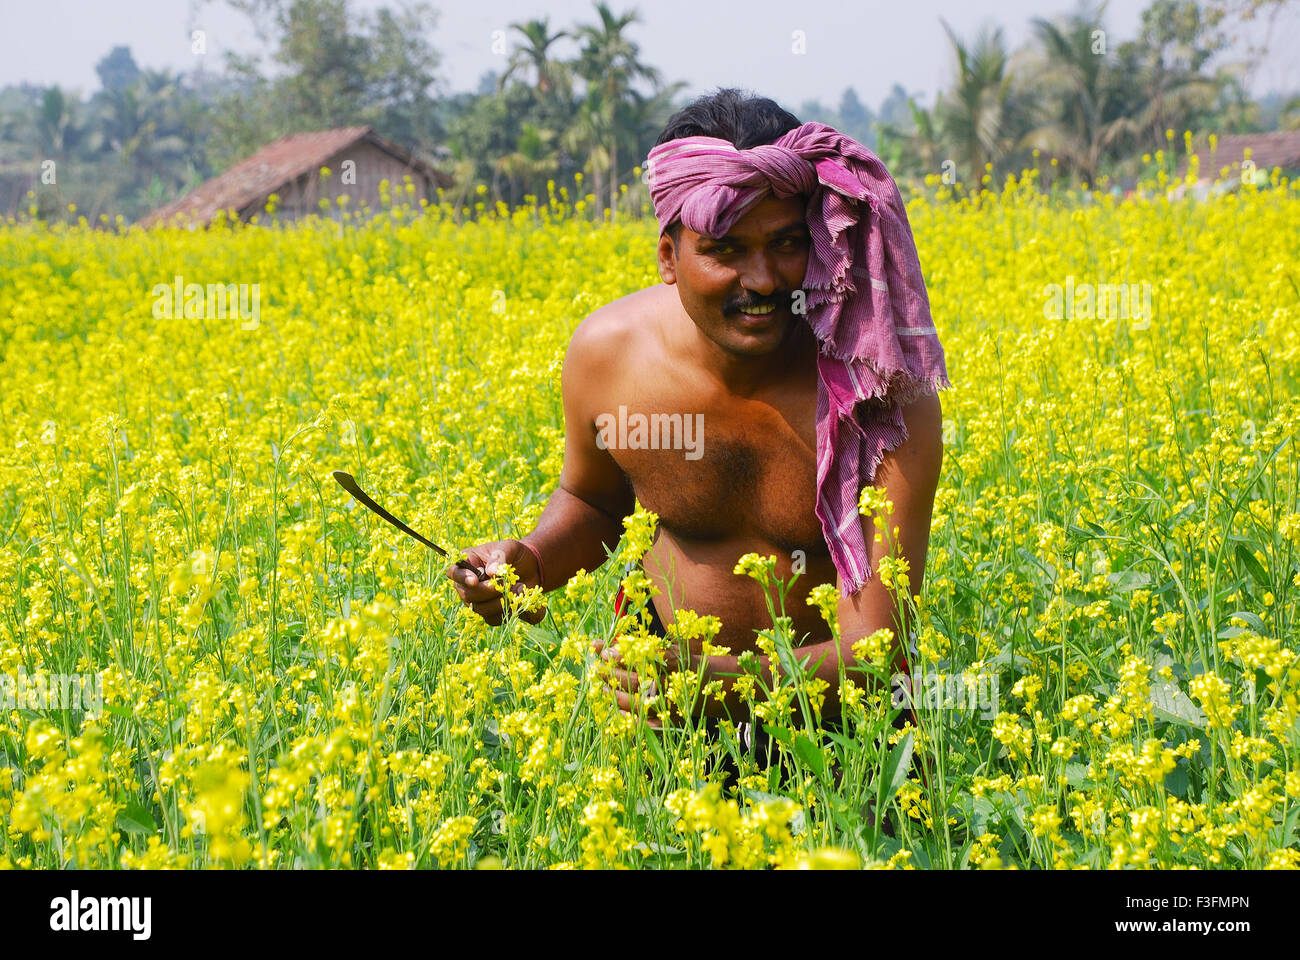 Man harvesting muster seed in field Stock Photo